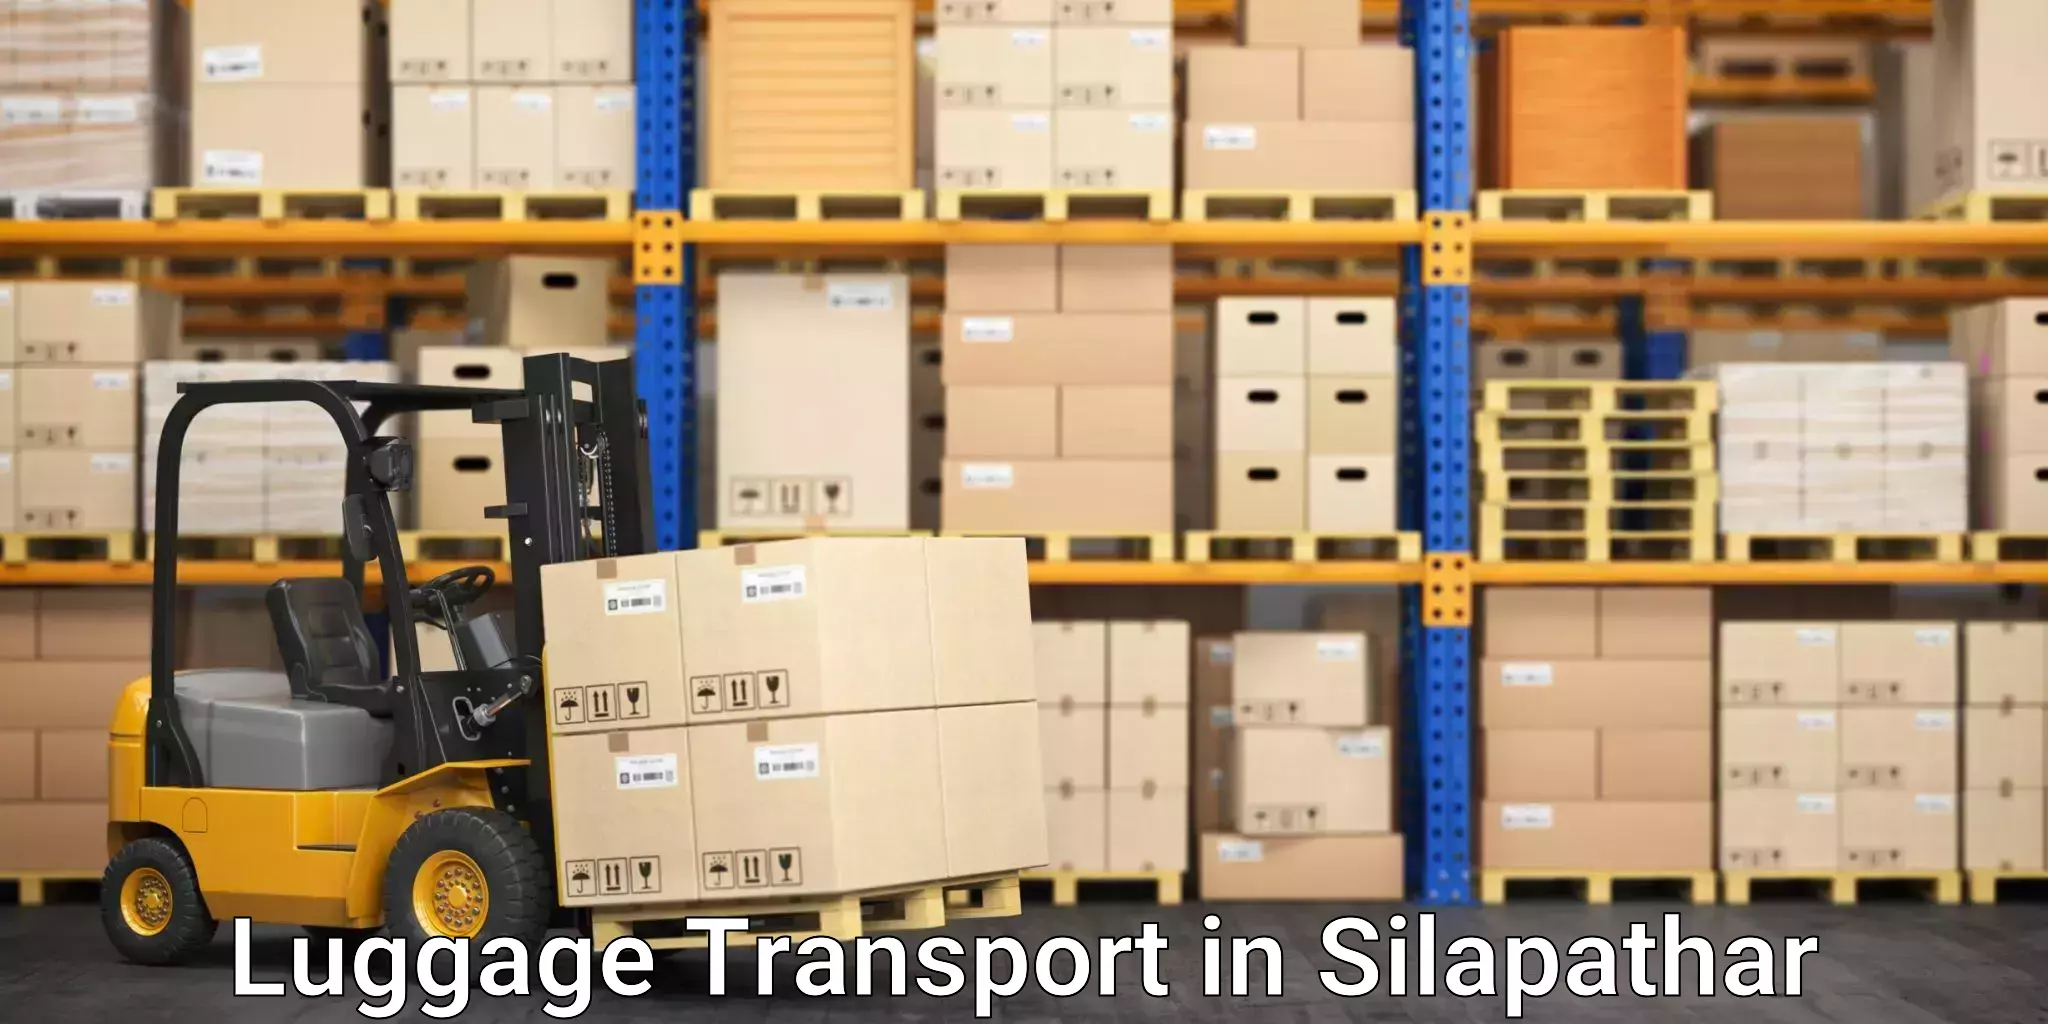 Domestic luggage transport in Silapathar